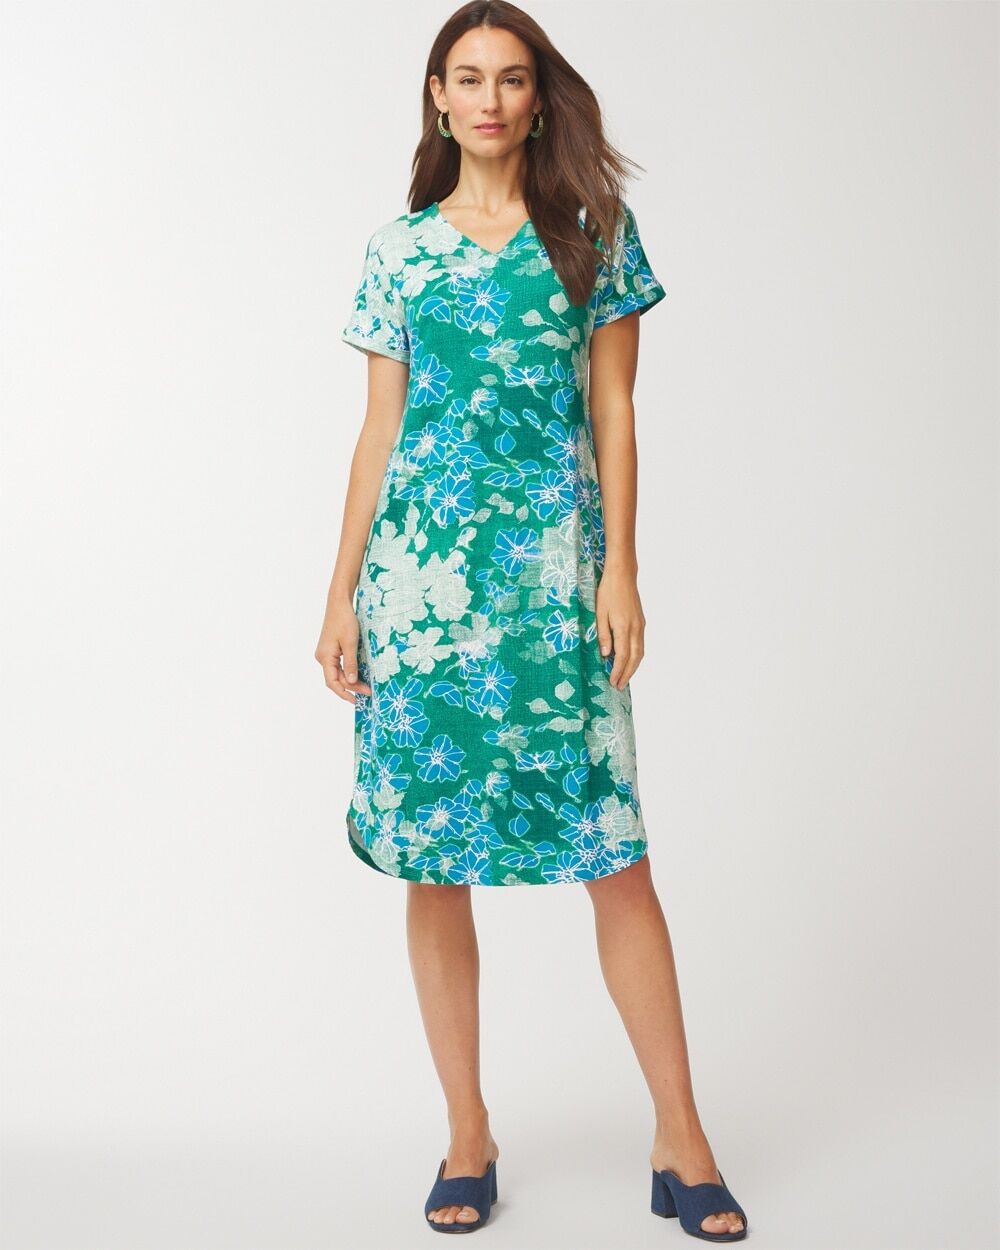 Chico's Off The Rack Women's Prairie Flowers Shirttail Midi Dress in Lotus Leaf Size 16/18   Chico's Outlet, Spring Dresses - Lotus Leaf - Women - Size: 16/18